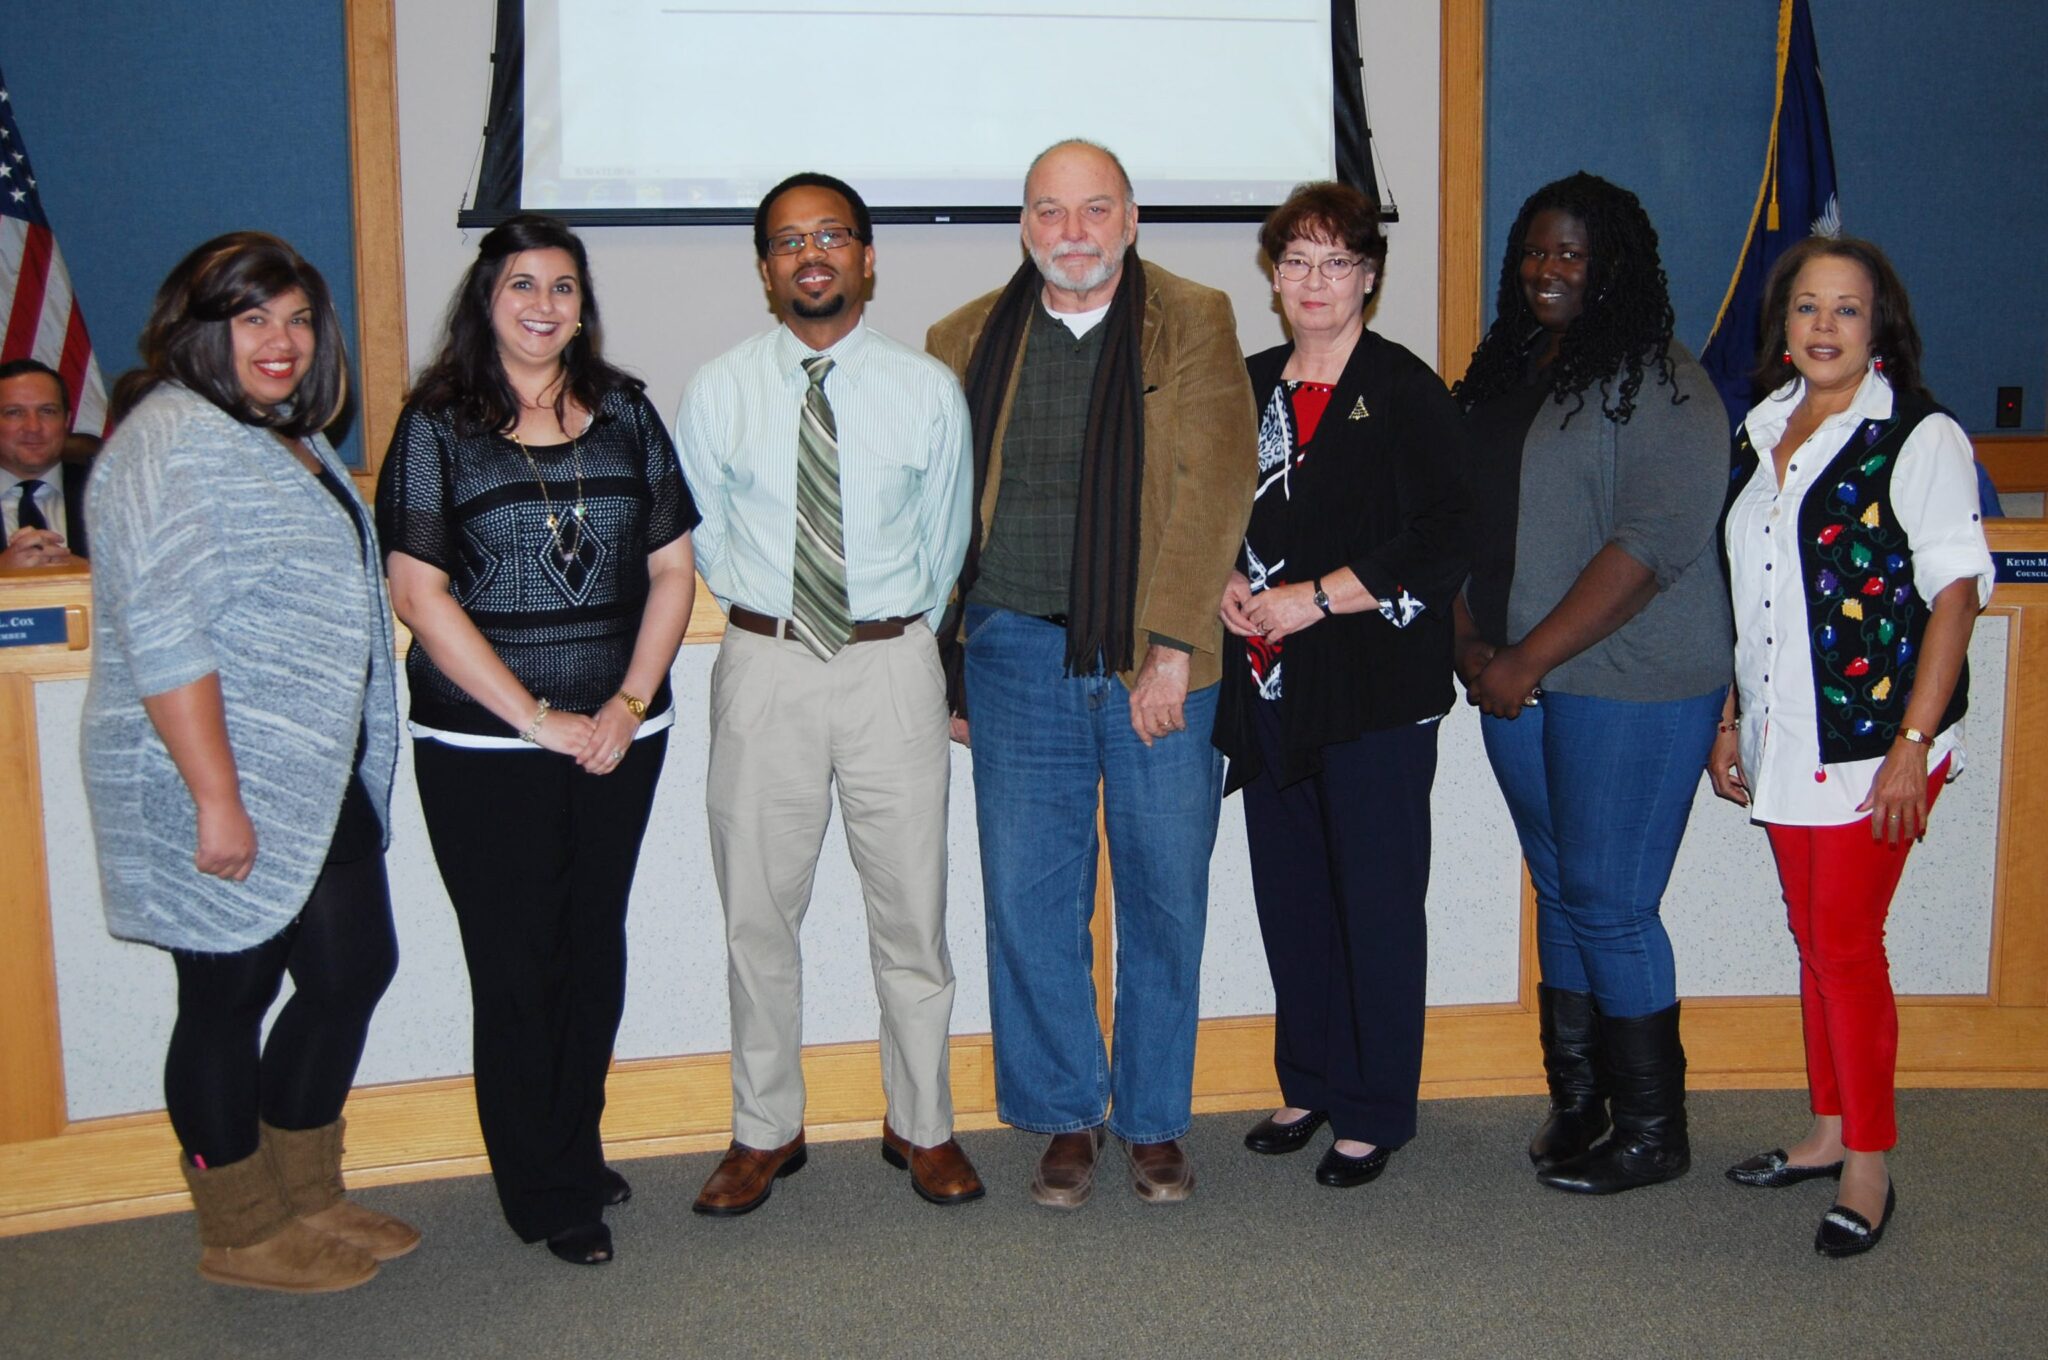 Pictured: Cultural Arts Commission members were recognized at the Dec. 13 Goose Creek City Council meeting. Pictured are (l-r) Lindsey Kerr, Andrea Morgan, Michael Owens, Tony Young, Pamela J. Smith, Sharina Haynes and Marsha Hassell.